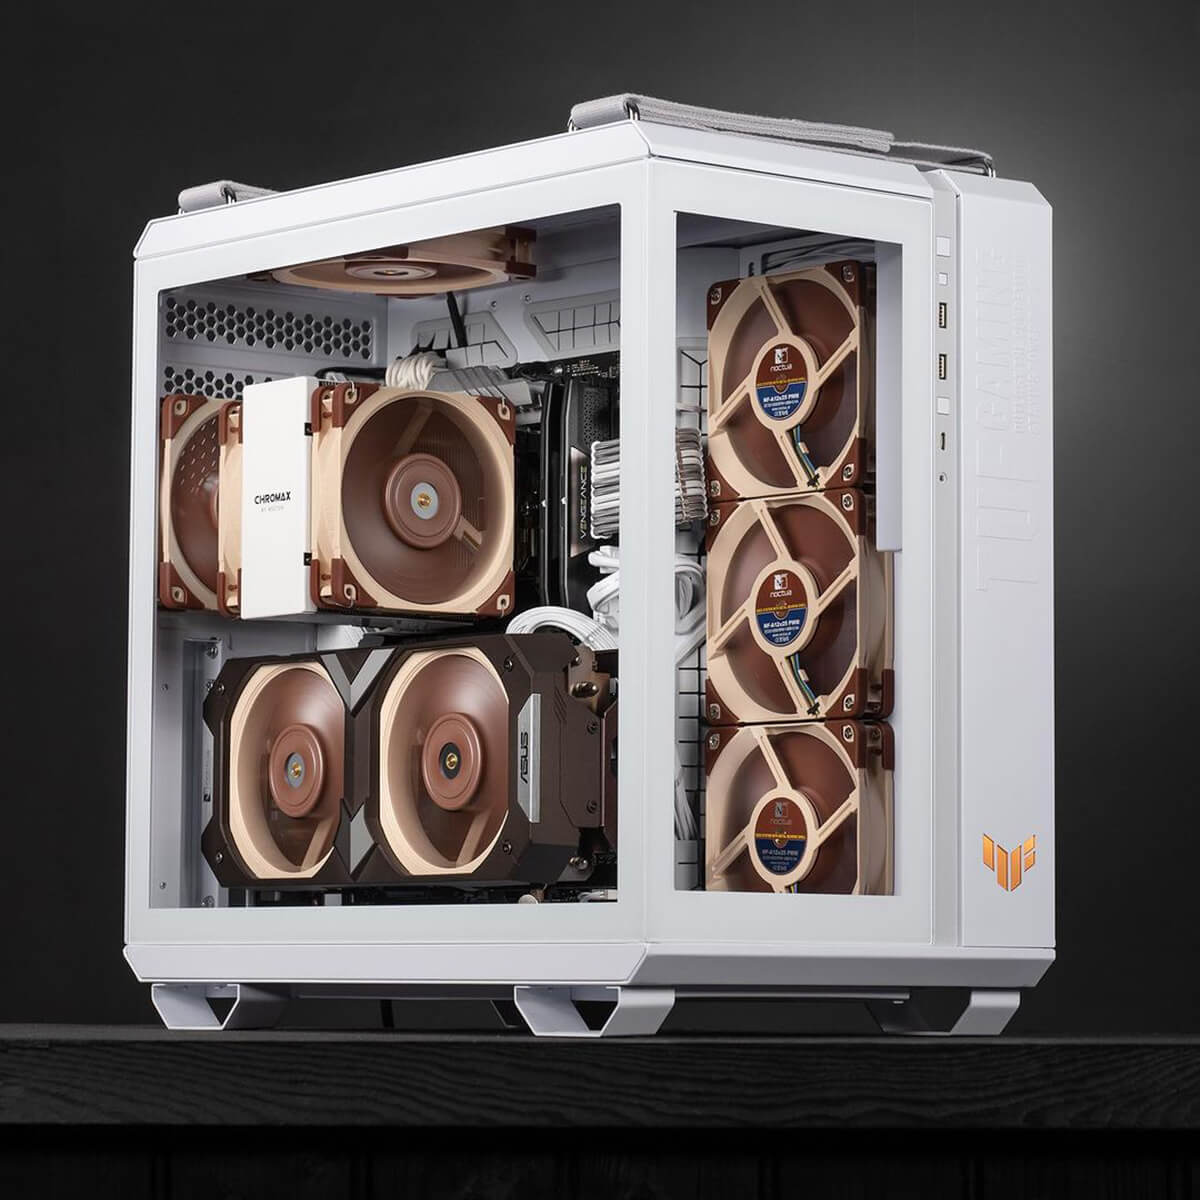 Angled-view of a full Noctua PC build with a white chassis